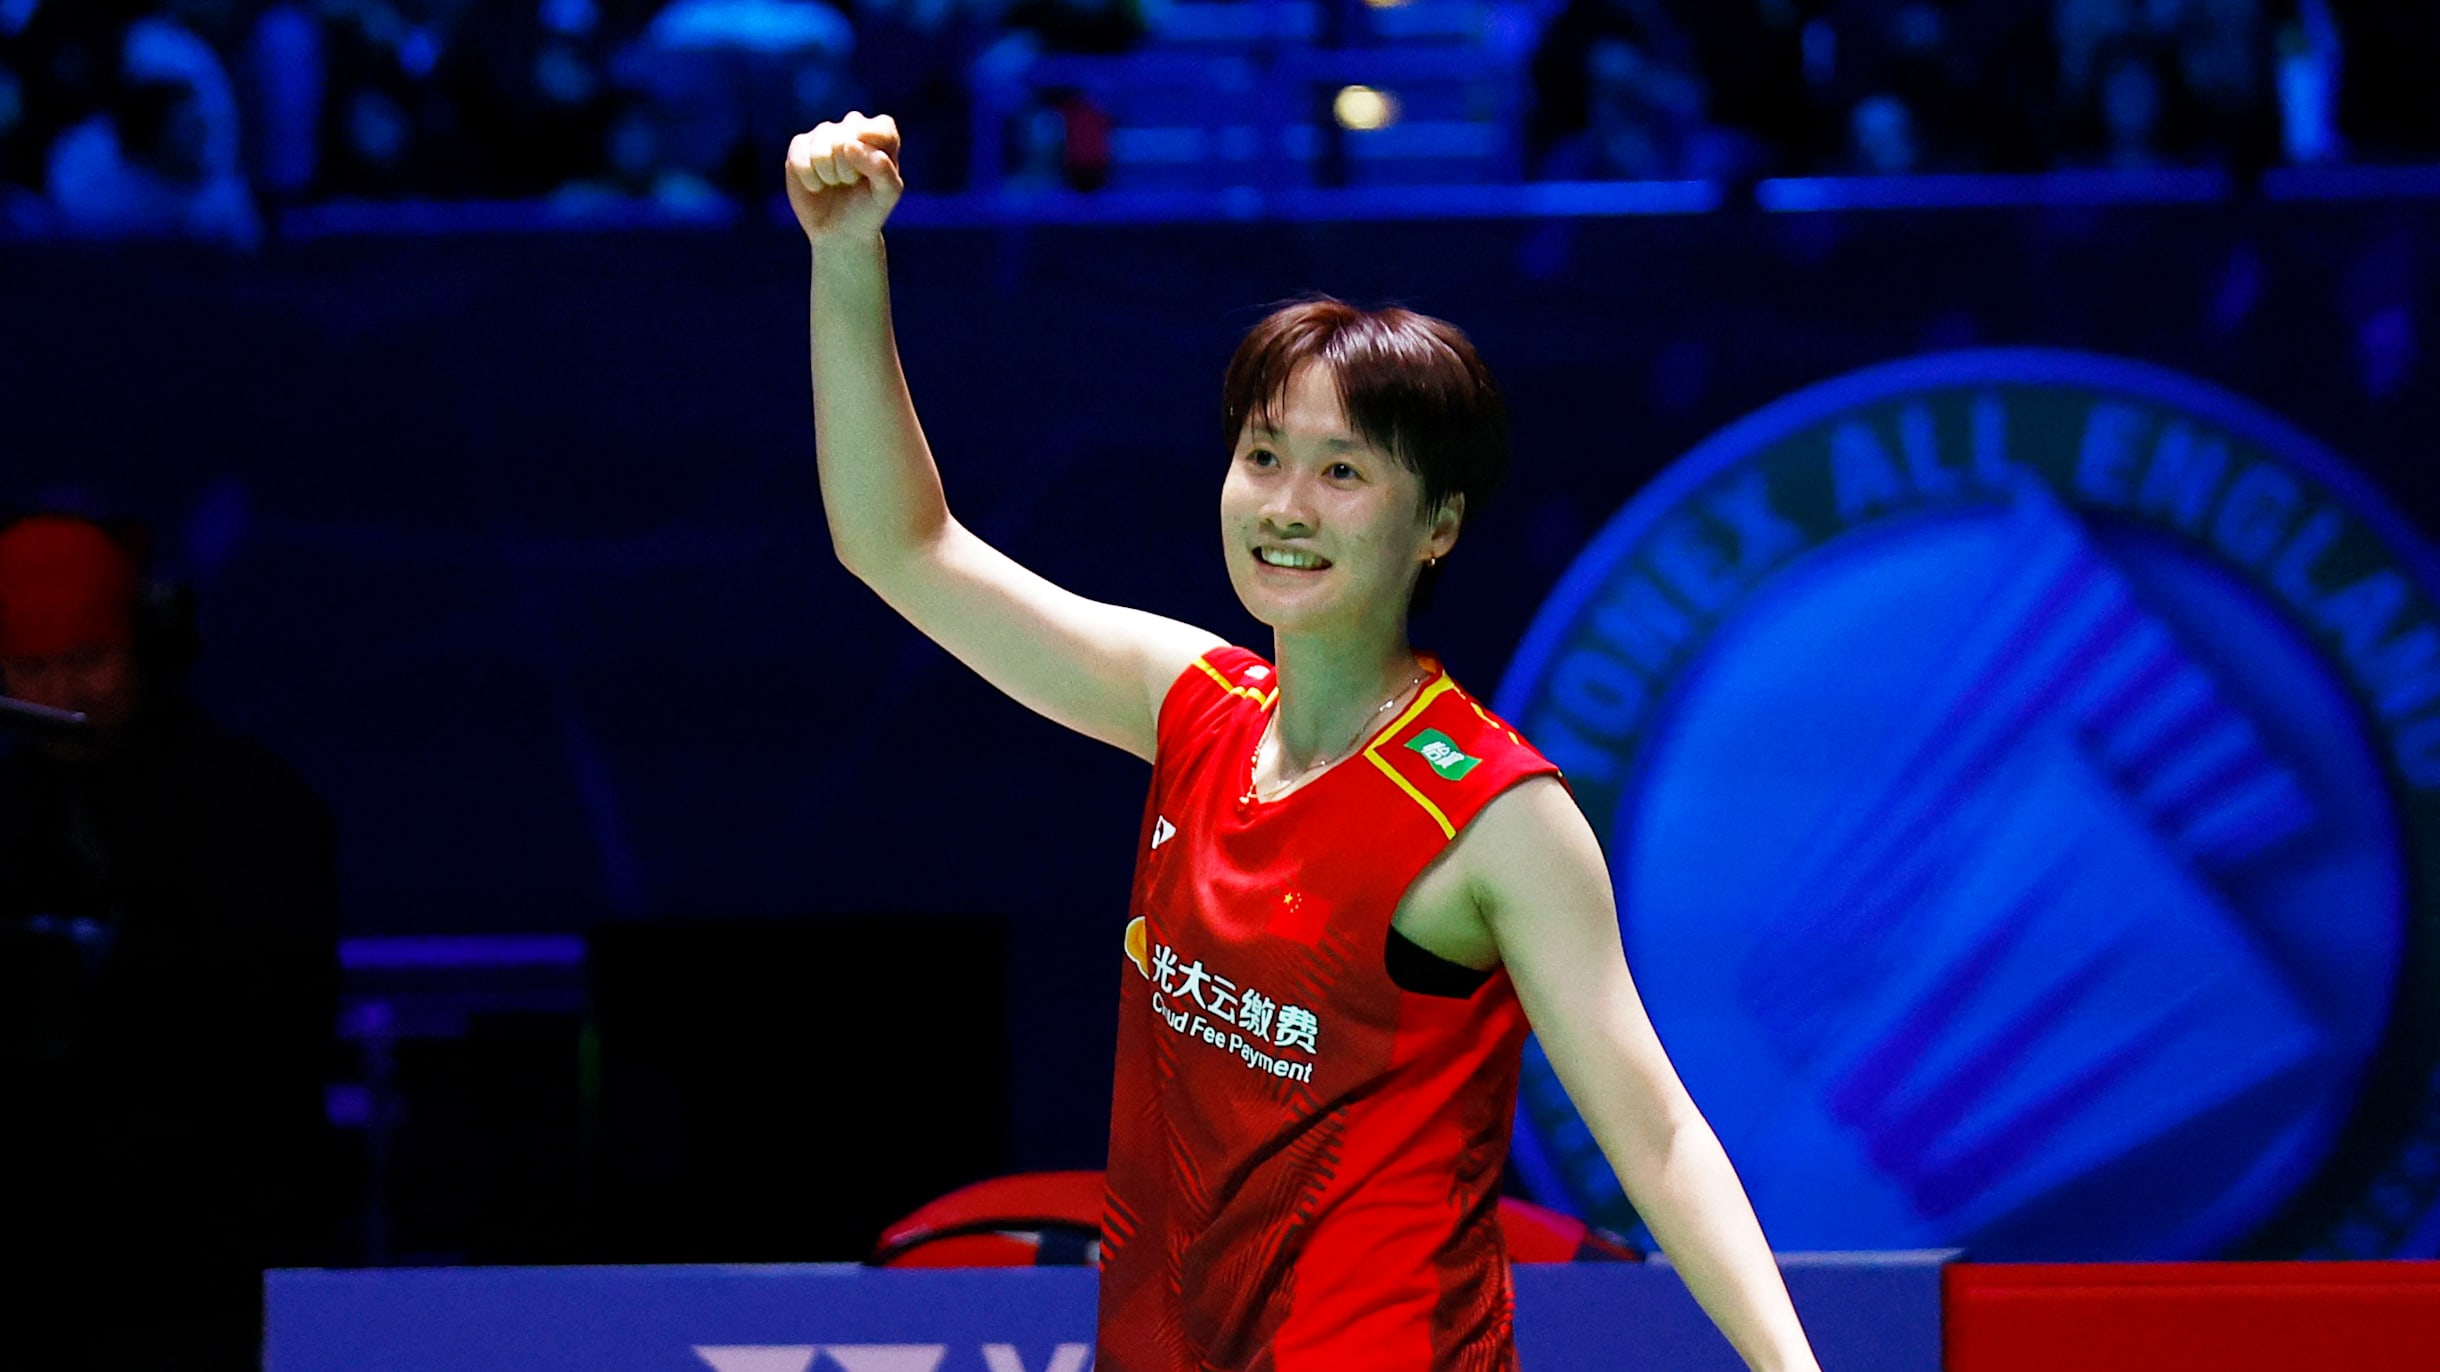 All England Open 2023 Badminton: Live finals score updates, results, and action highlights - Sunday 19 March 2023